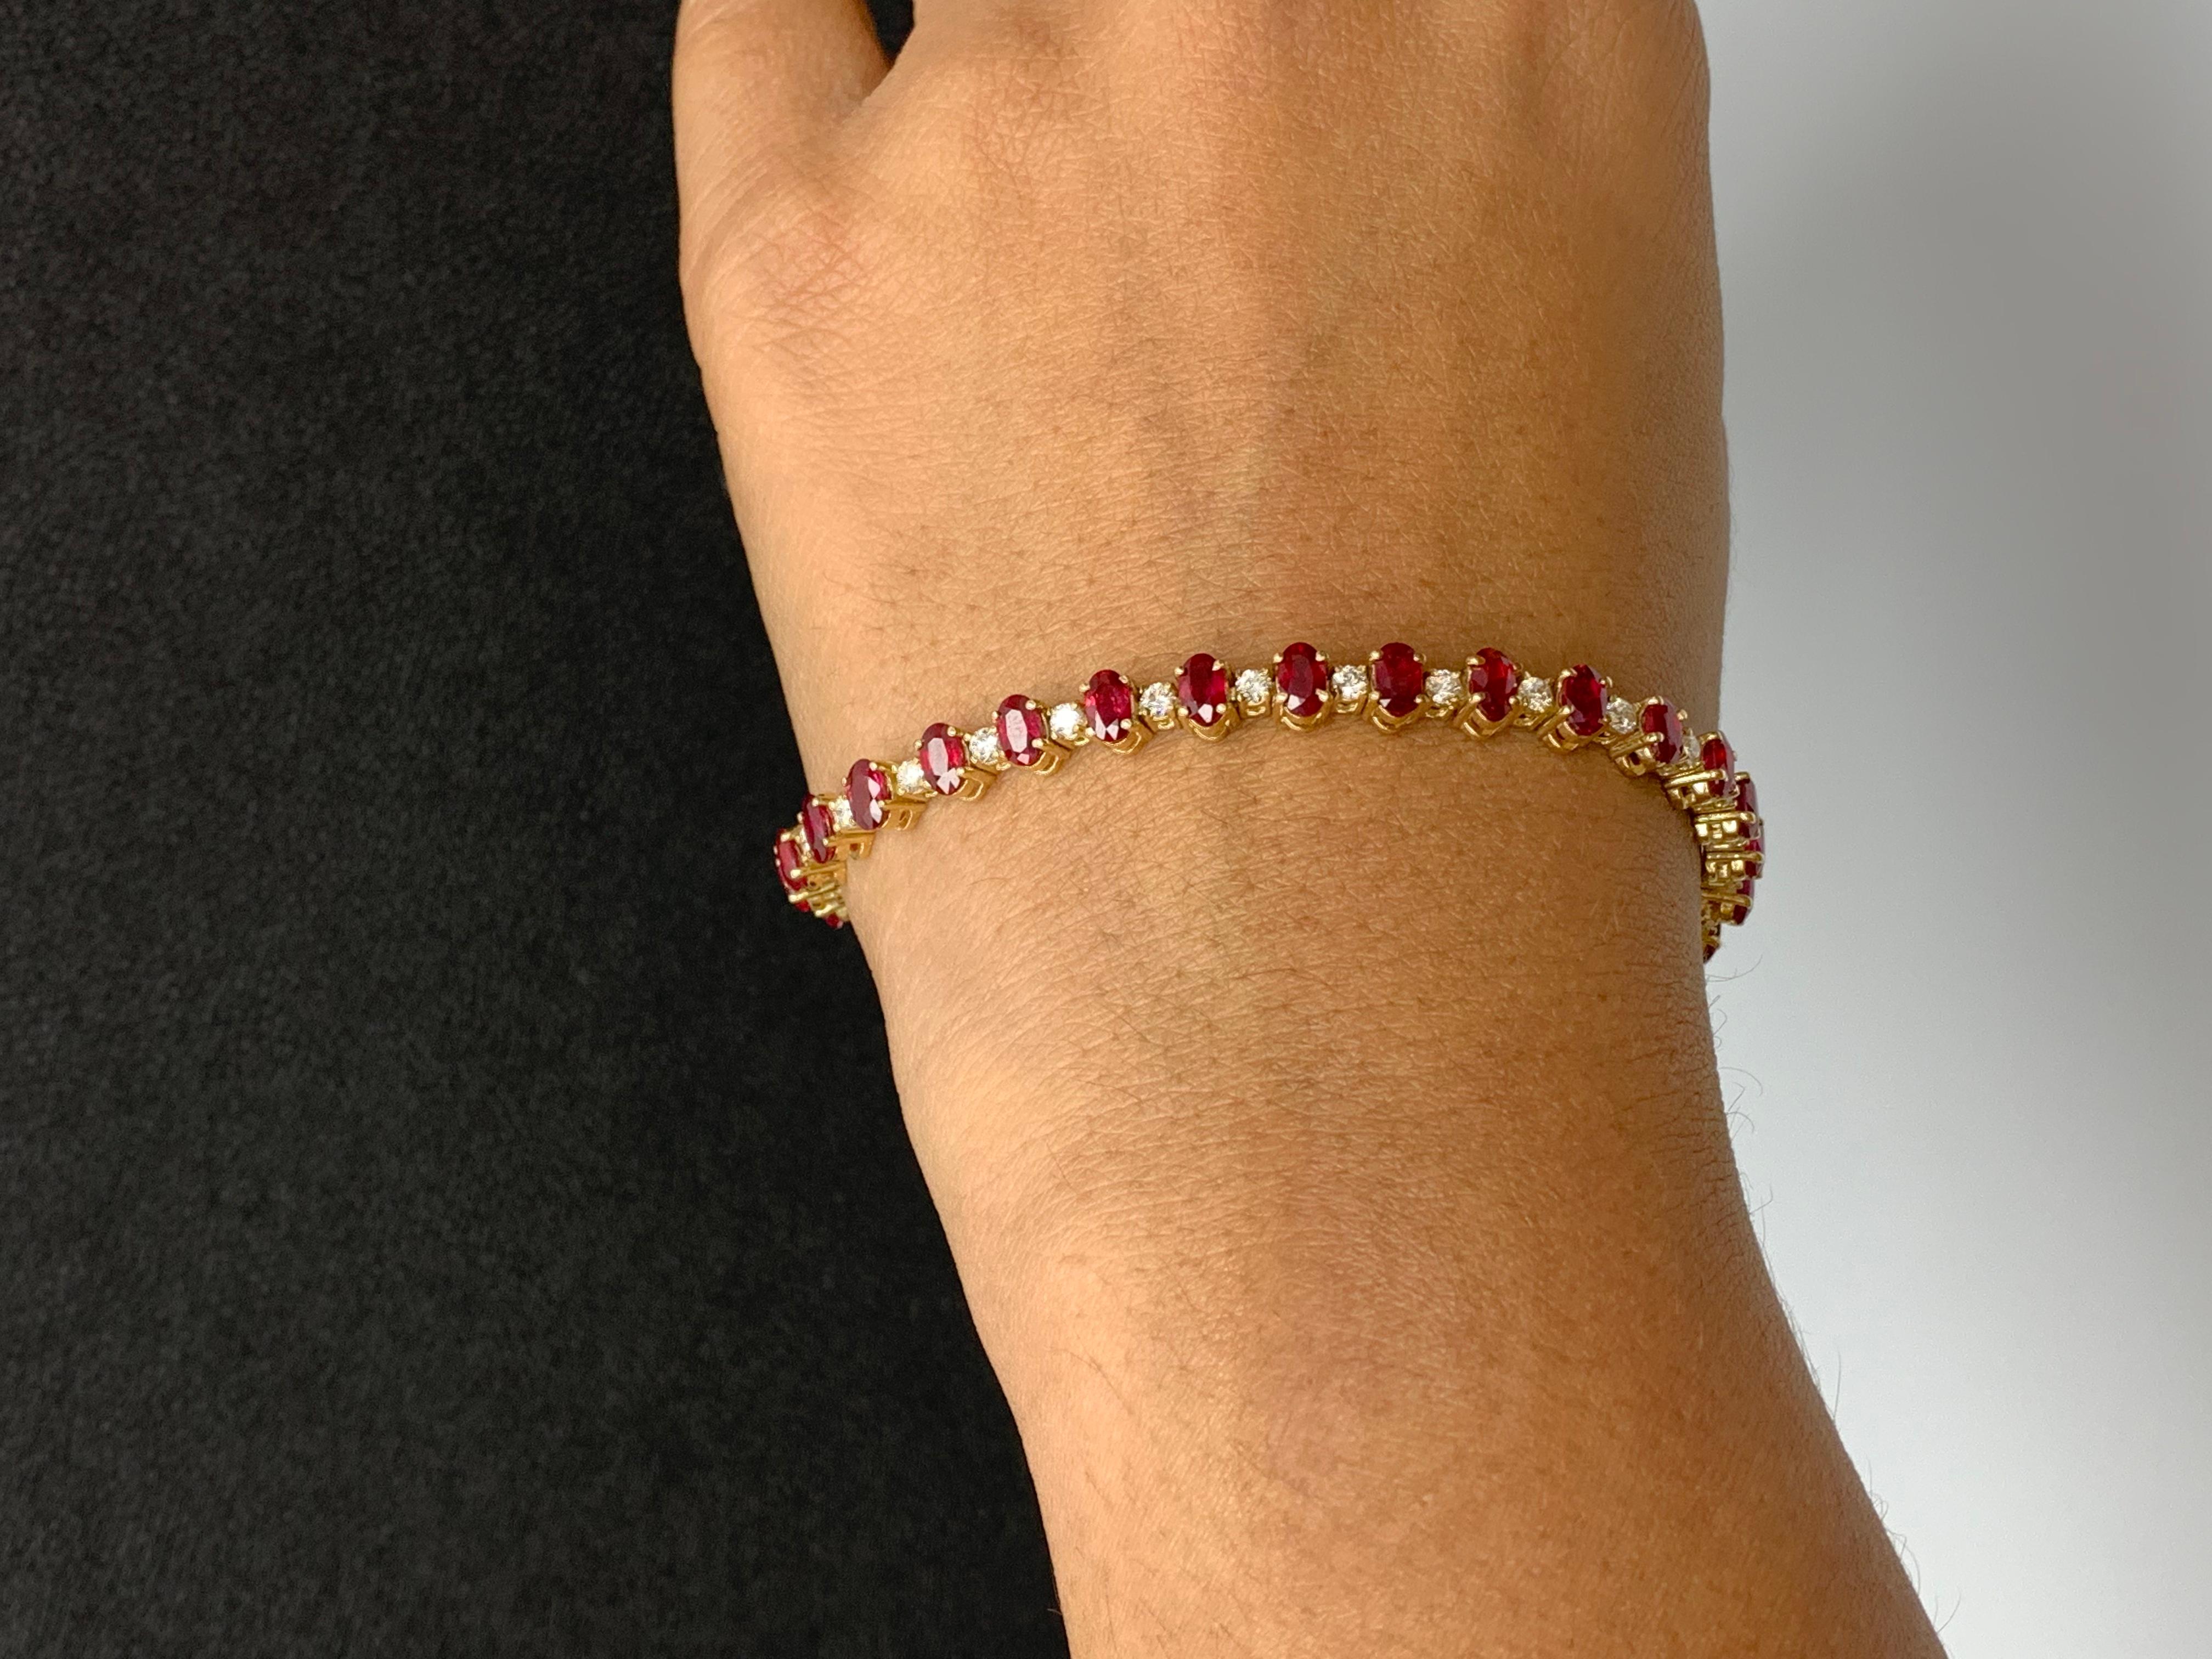 Grandeur 9.27 Carats Oval Cut Ruby and Diamond Bracelet in 14k Yellow Gold For Sale 10